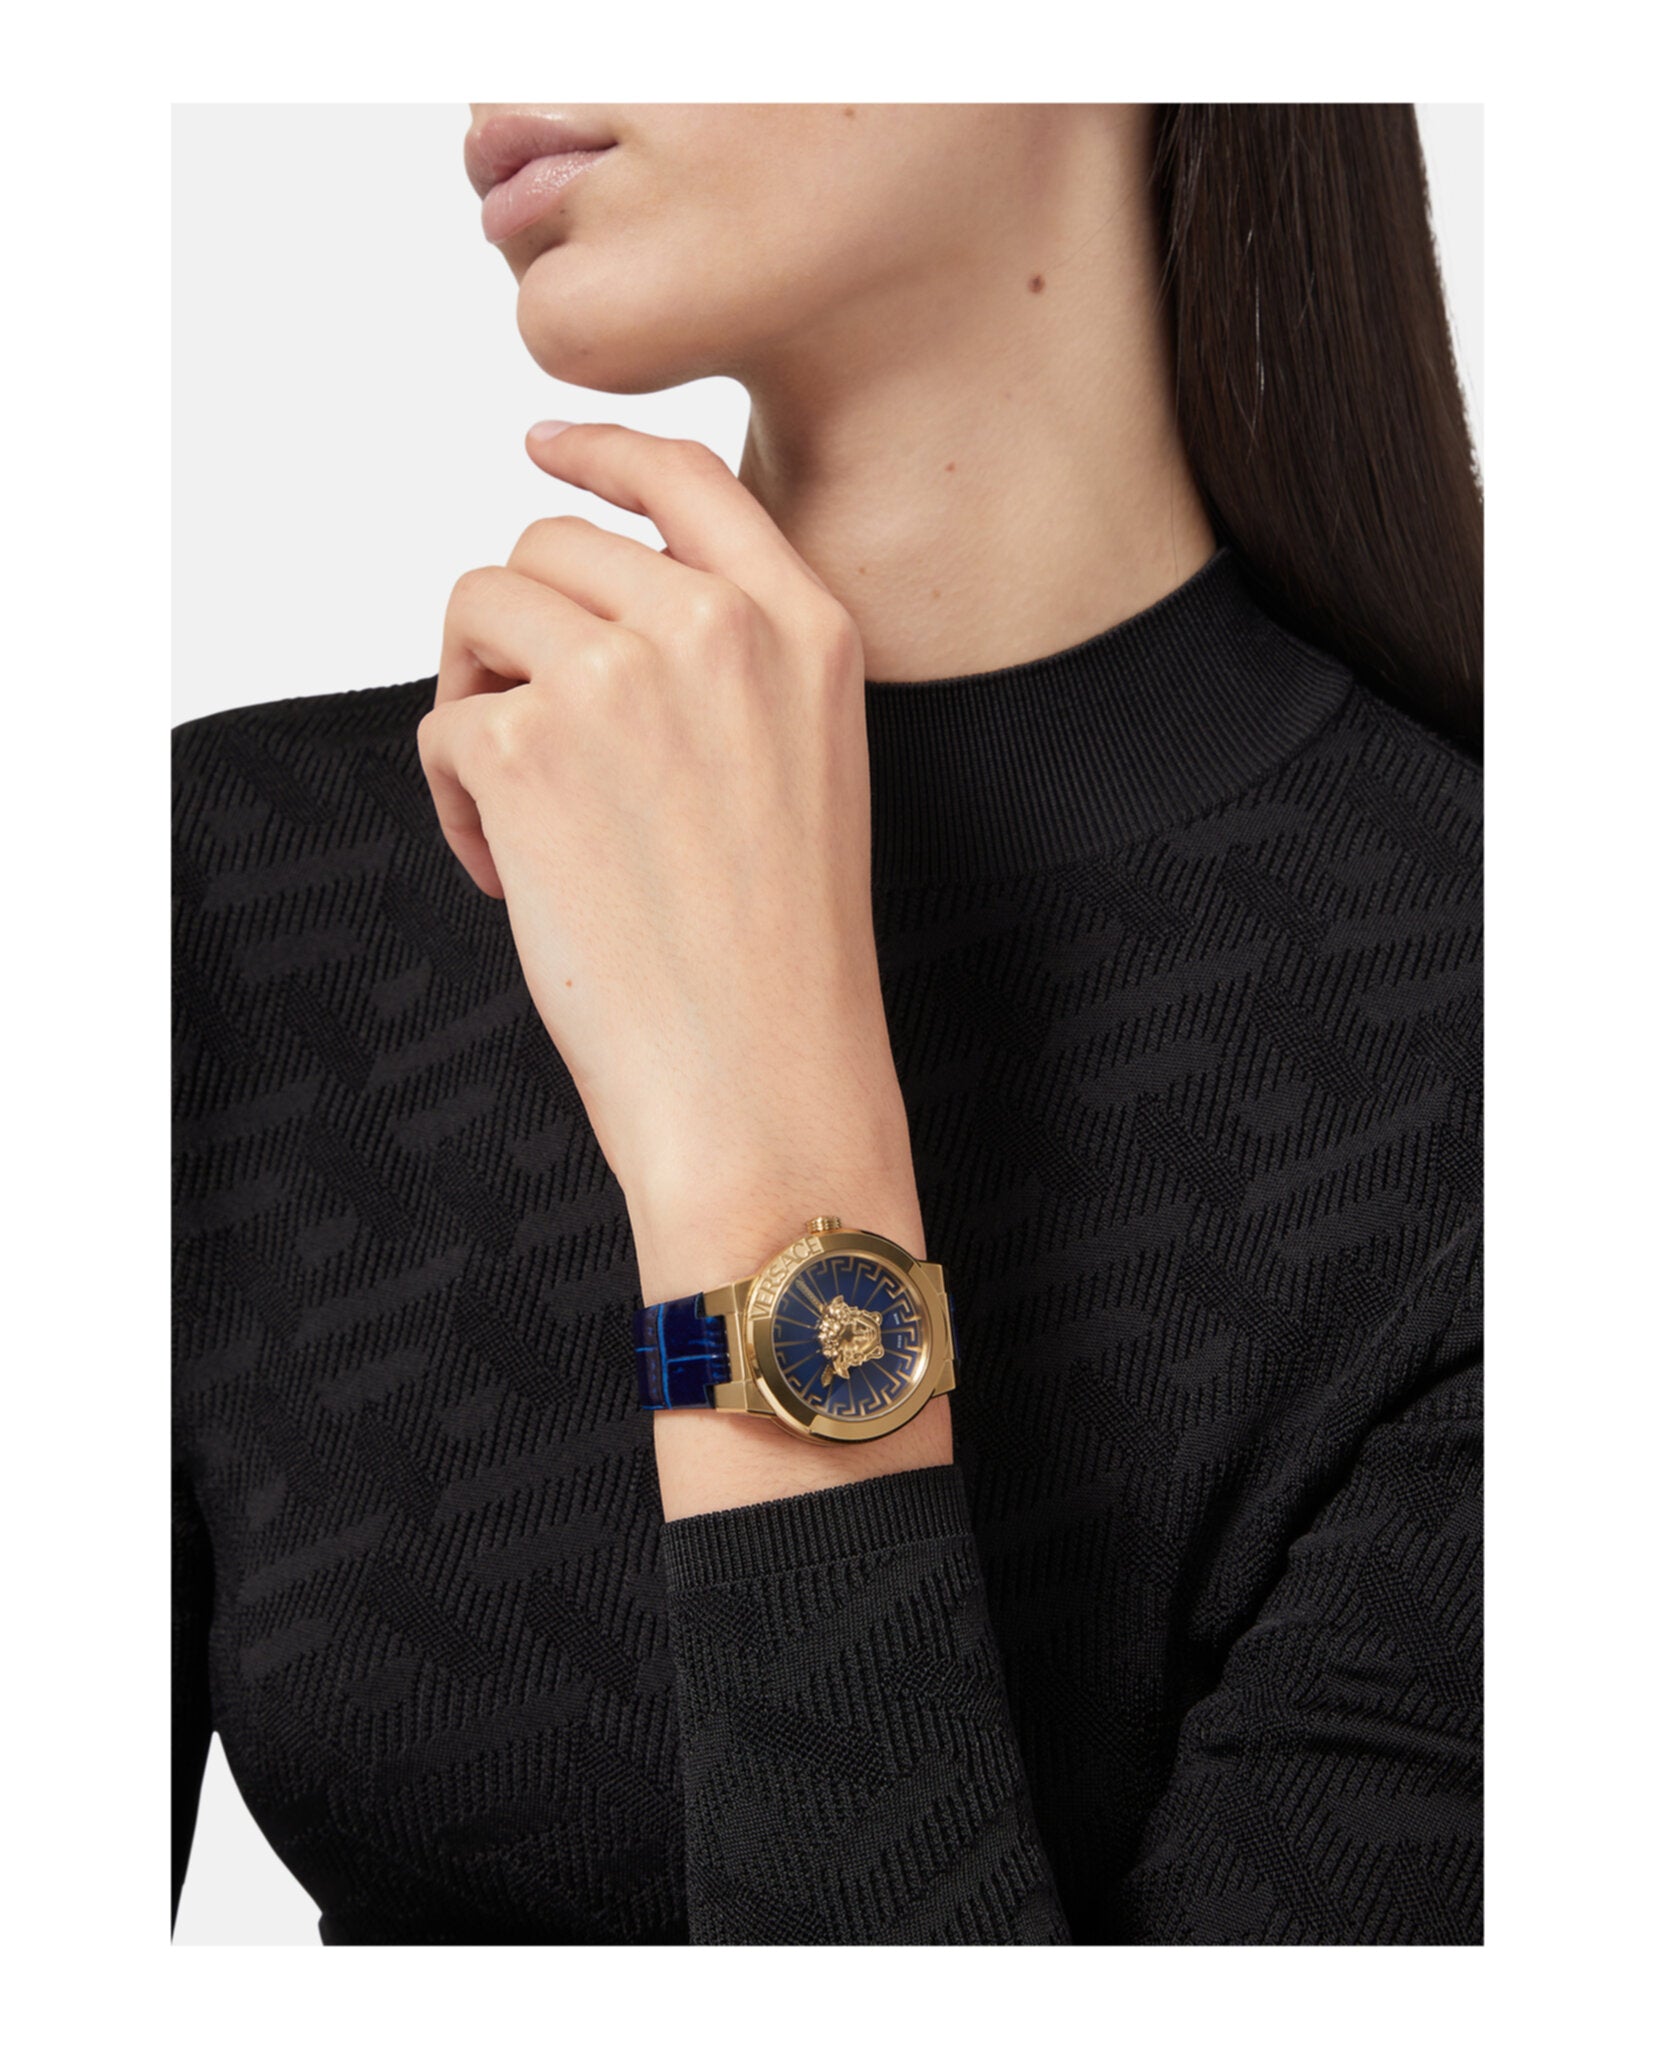 Madaluxe Versace Watches | Time Infinite MadaLuxe Medusa Womens Time –